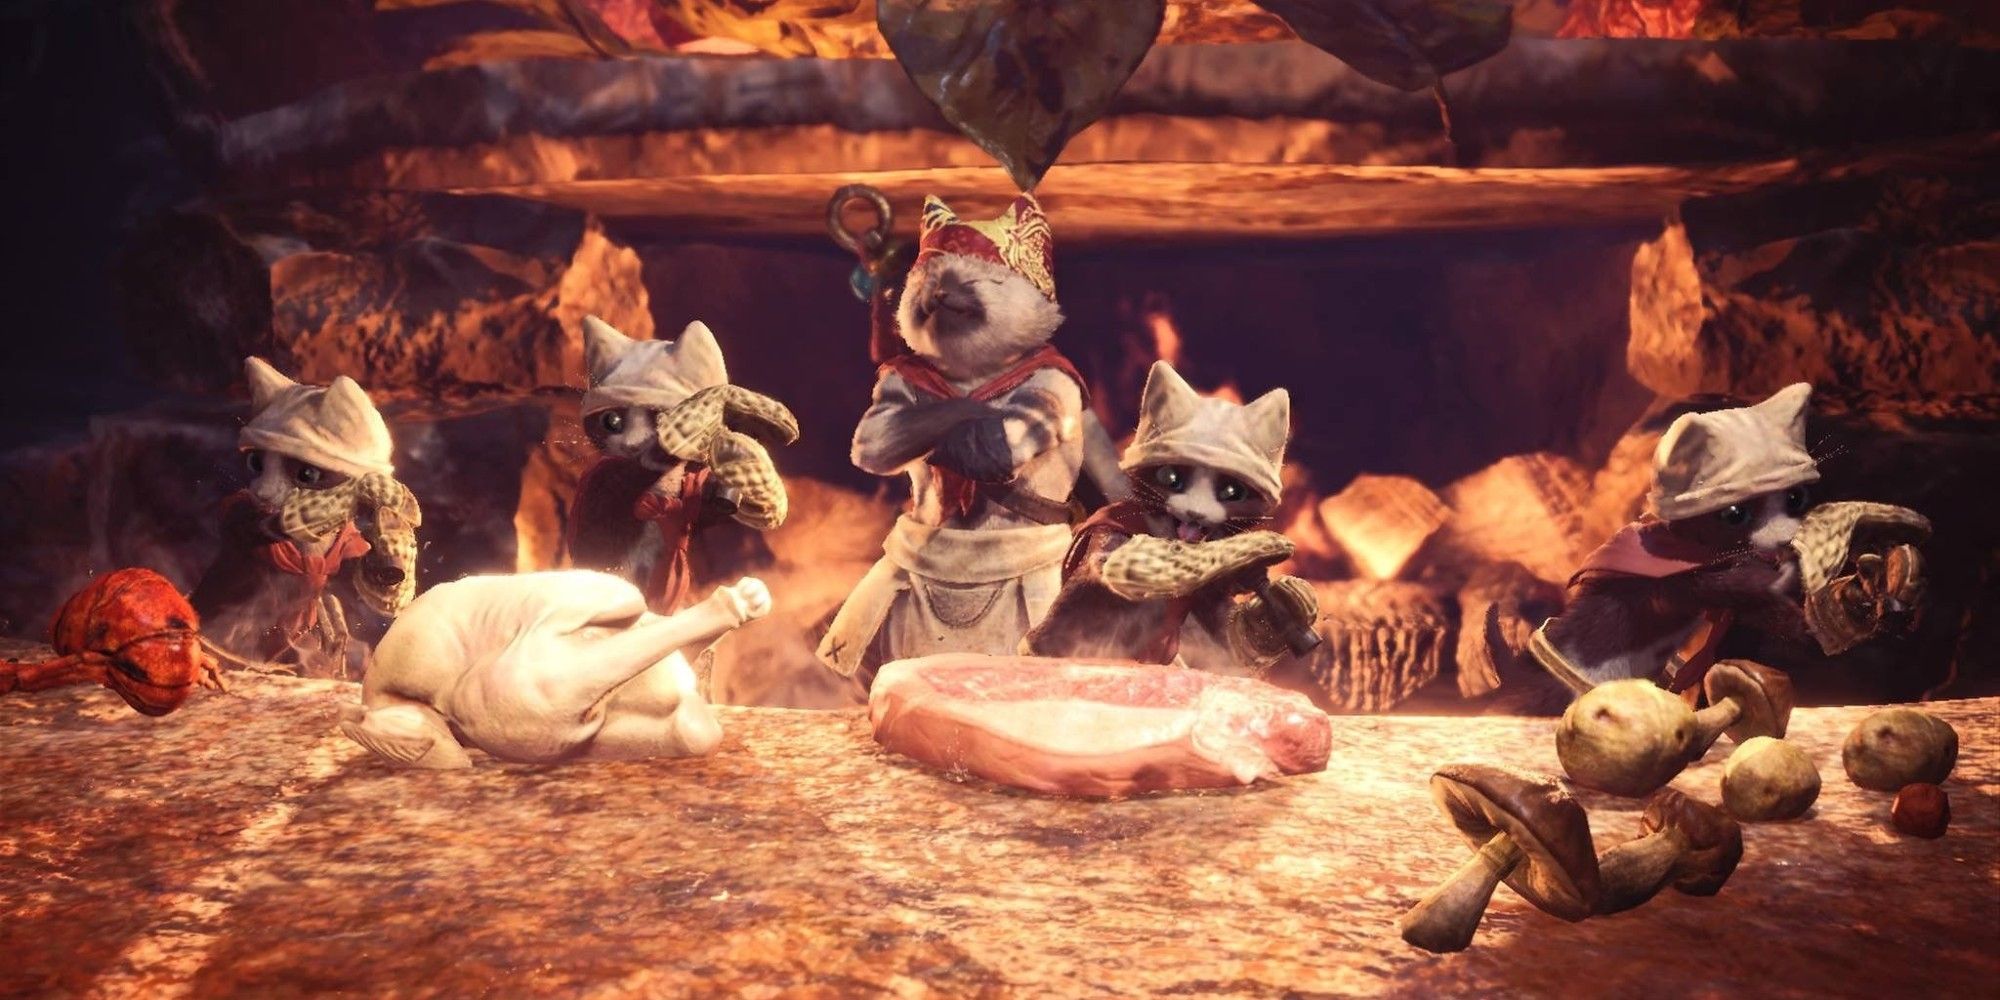 group of Palicoes preparing a meal in Monster Hunter World